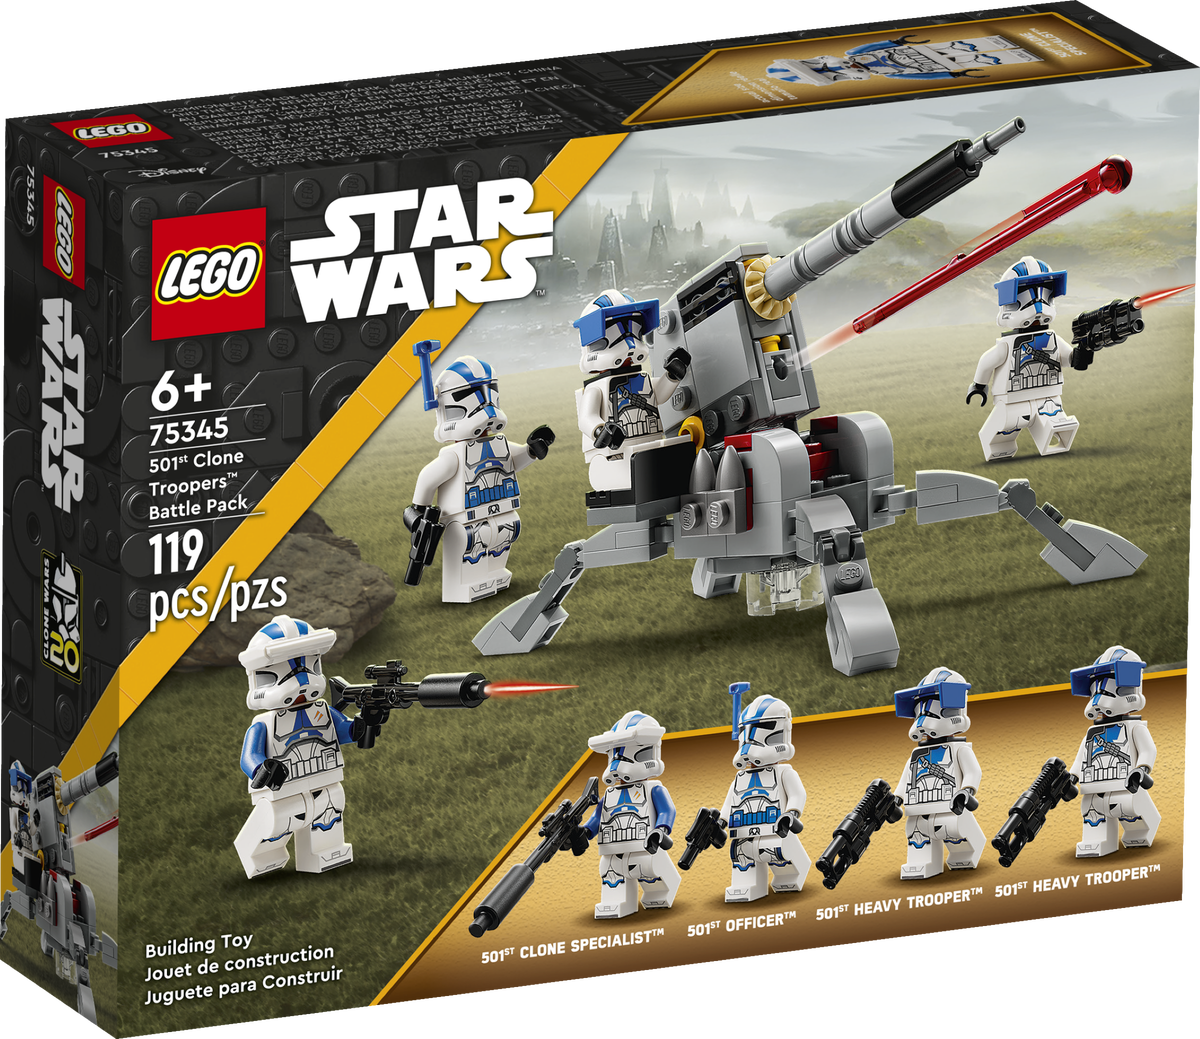 LEGO Star Wars - 501st Clone Troopers Battle Pack (75345) | LEGO